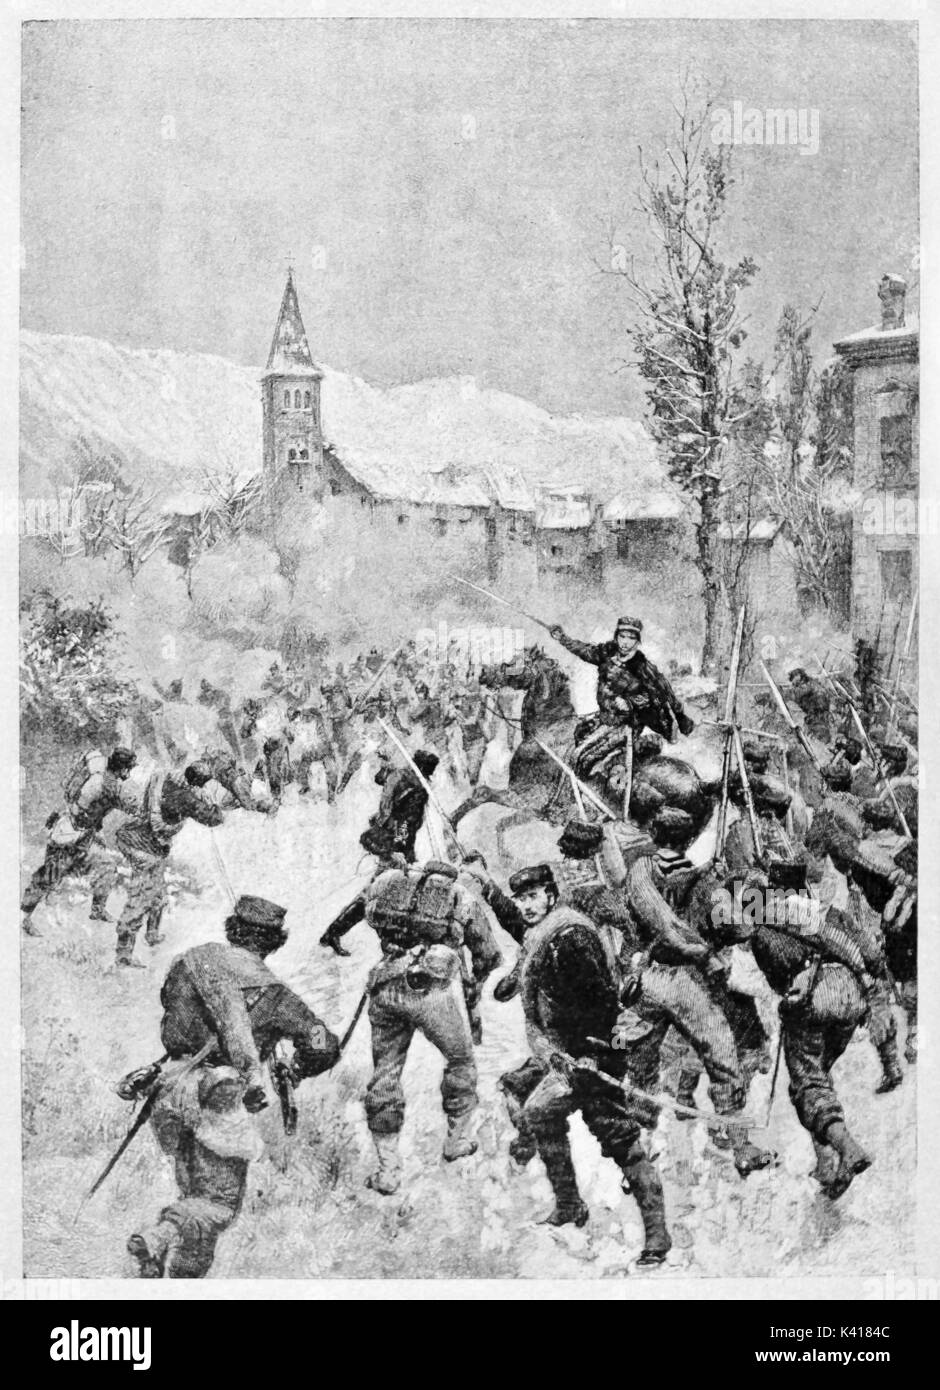 Ancient battle in a small town close to snowed mountains. Chatillon attack in 1870 by troops led by Garibaldi. By E. Matania published on Garibaldi e i Suoi Tempi Milan Italy 1884 Stock Photo